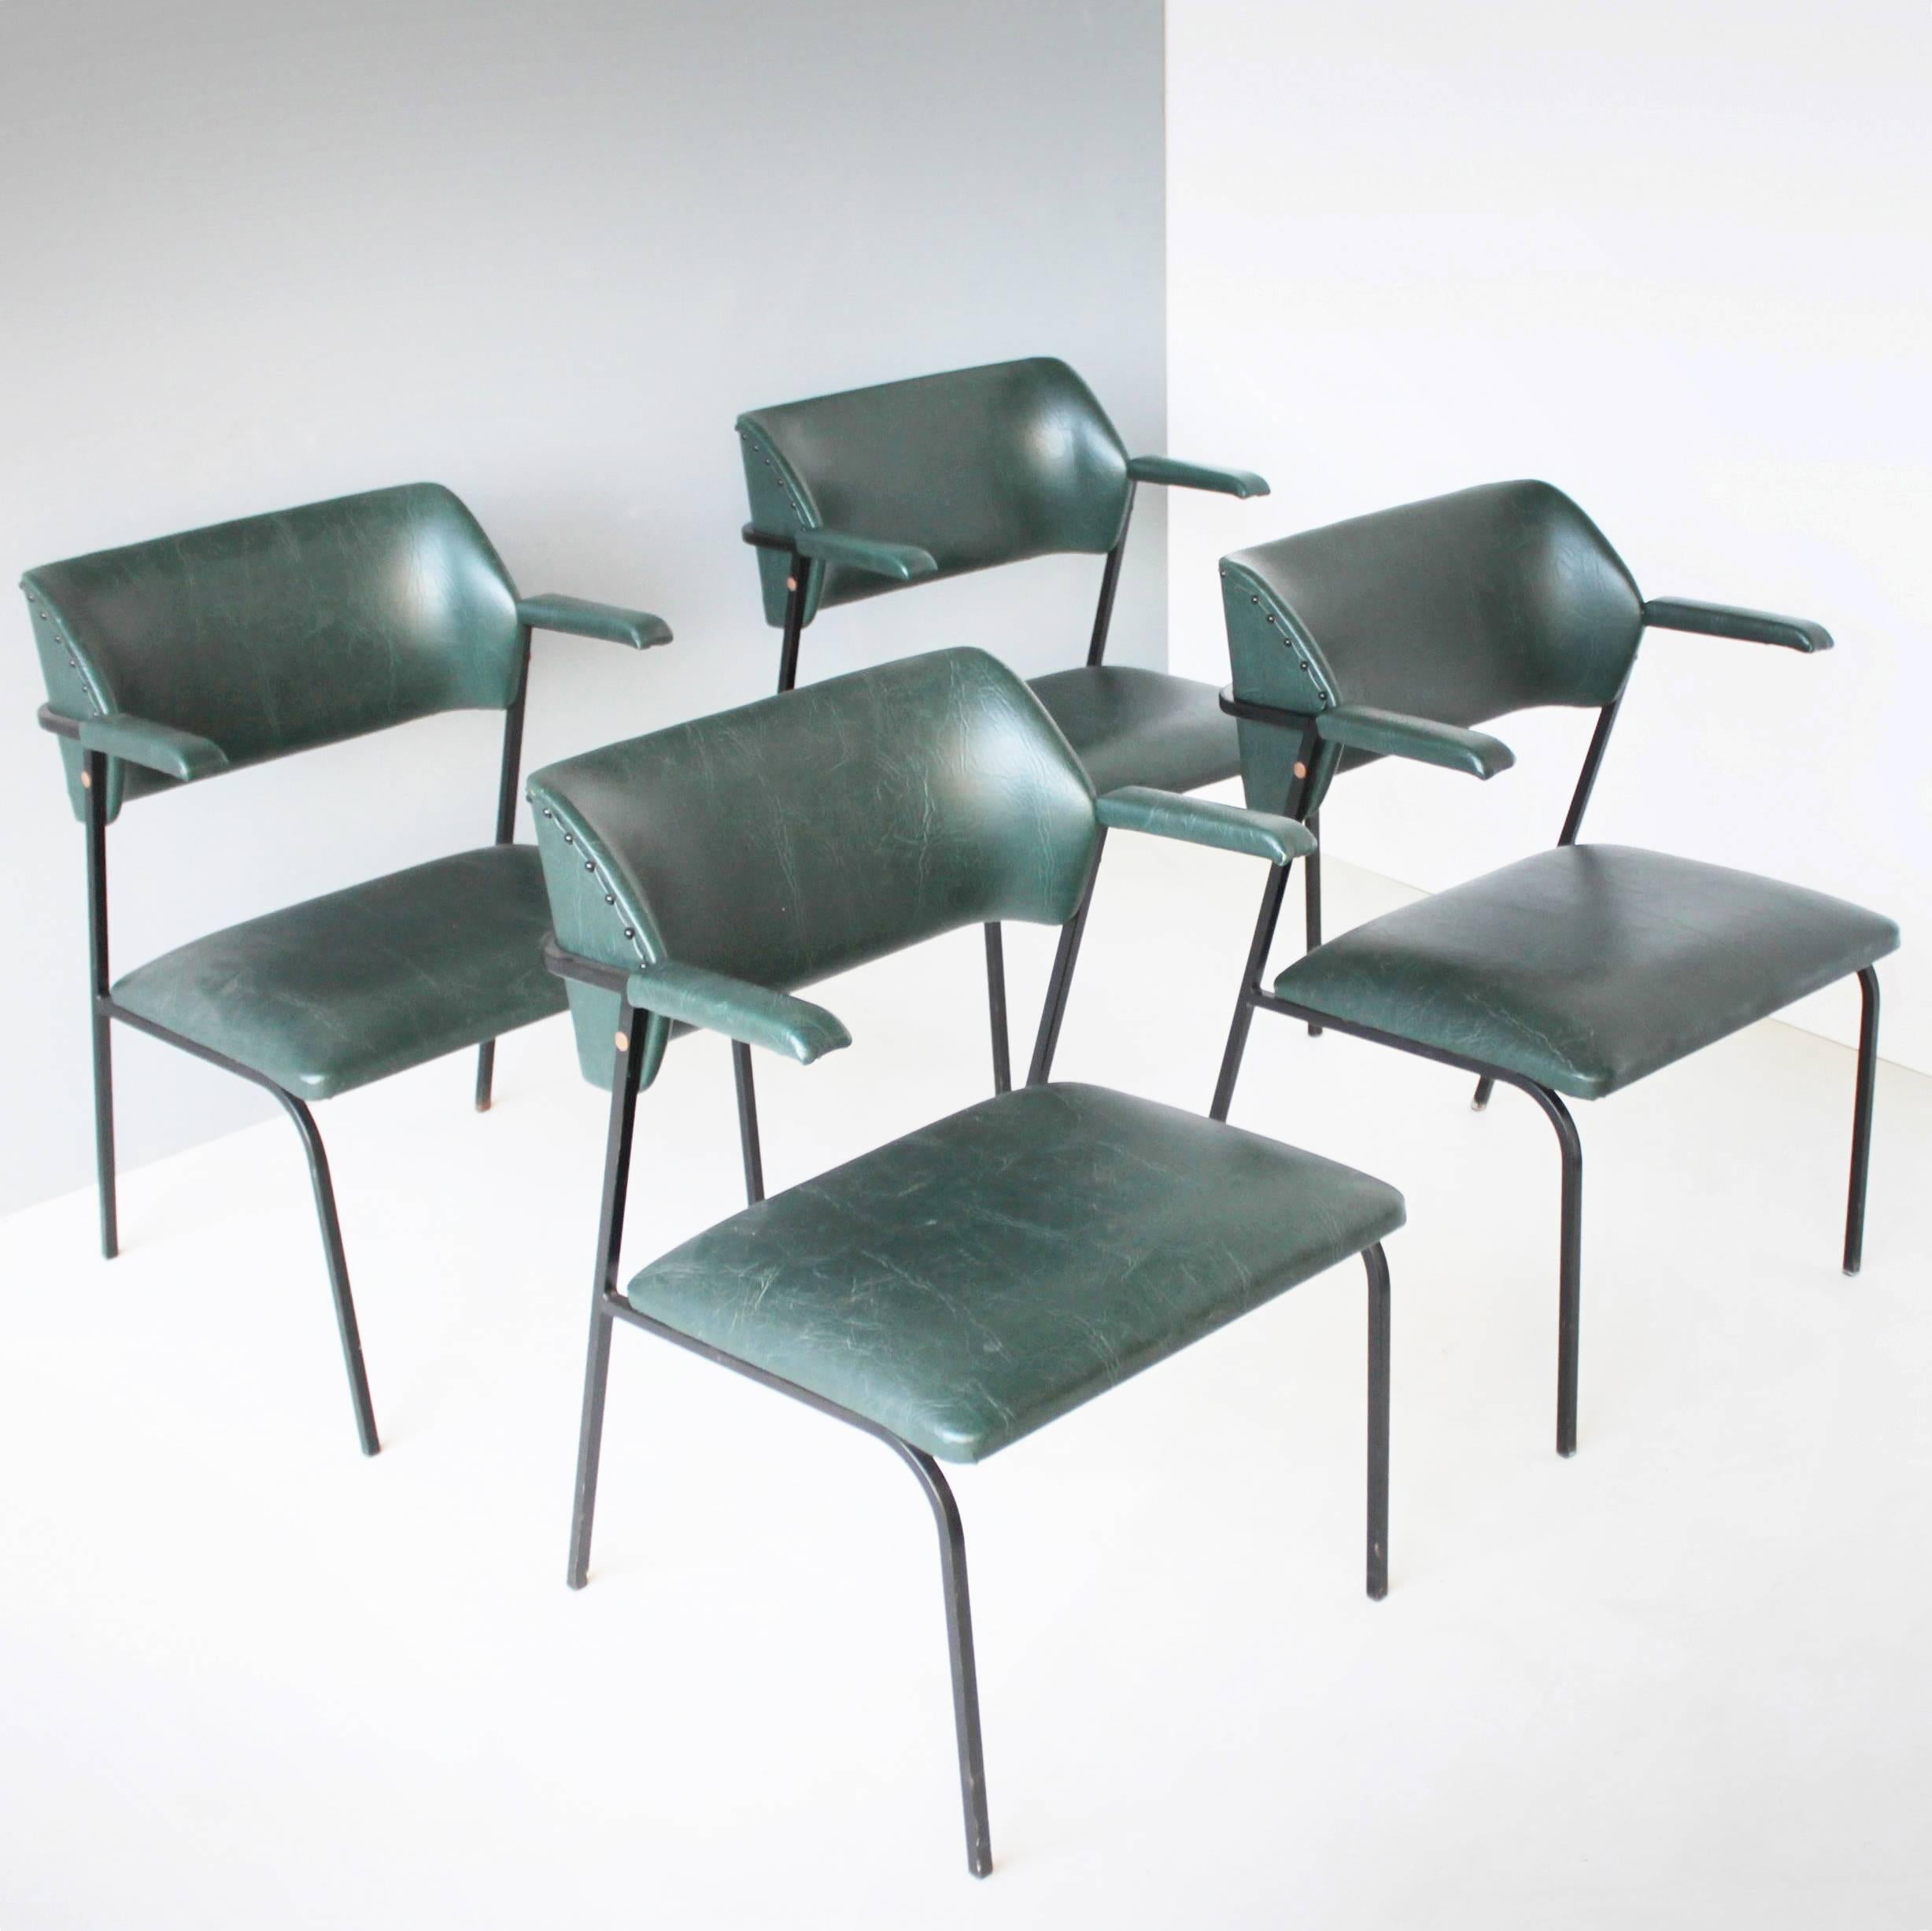 Four (4) dark green faux leather chairs in the style of Jacques Adnet. These four elegant armchairs come probably from Belgium or France.
Dimensions: Height 29.1 in. (74 cm), width 21.0 in. (53,5 cm), depth 20.5 in. (52 cm), seat height: 16.5 (42